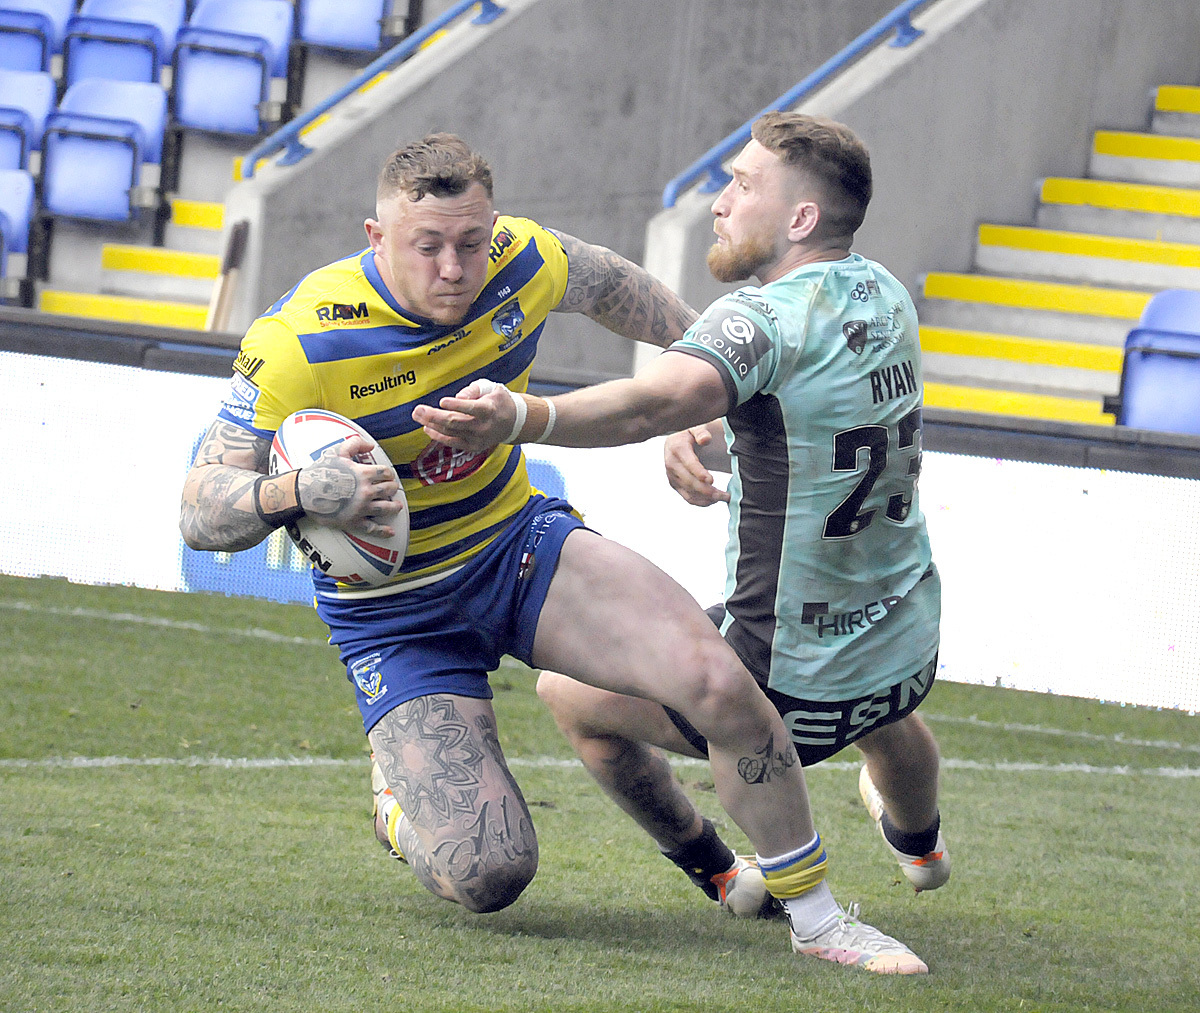 Charnleys other two tries this season came against Hull KR. Picture by Mike Boden